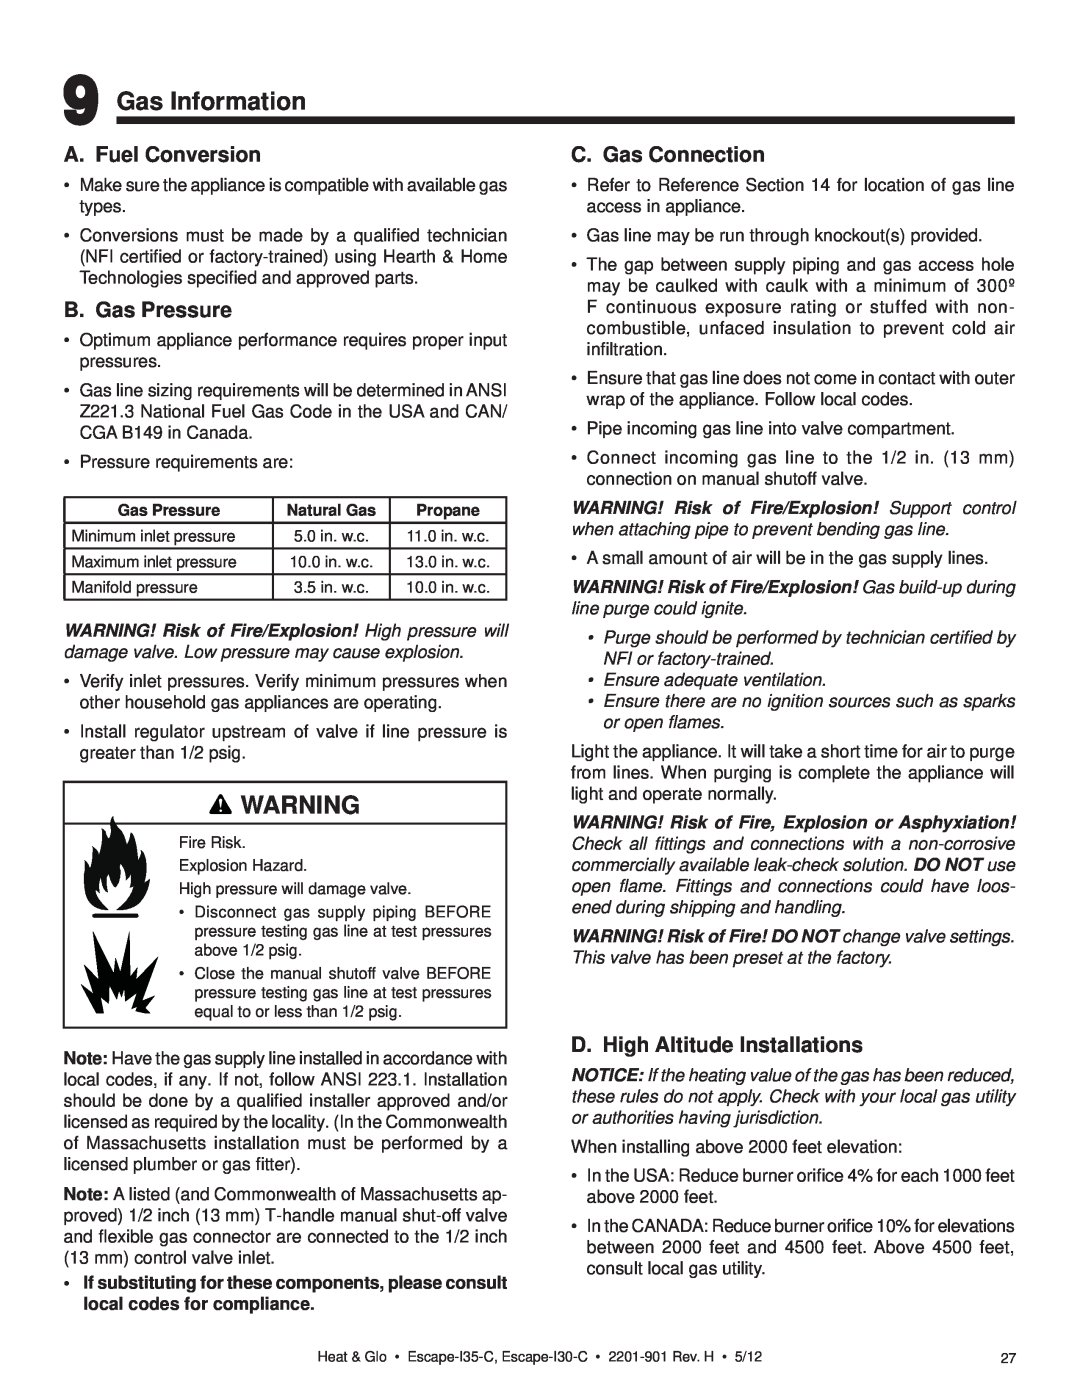 Heat & Glo LifeStyle ESCAPE-I35-C owner manual Gas Information, A. Fuel Conversion, B. Gas Pressure, C. Gas Connection 